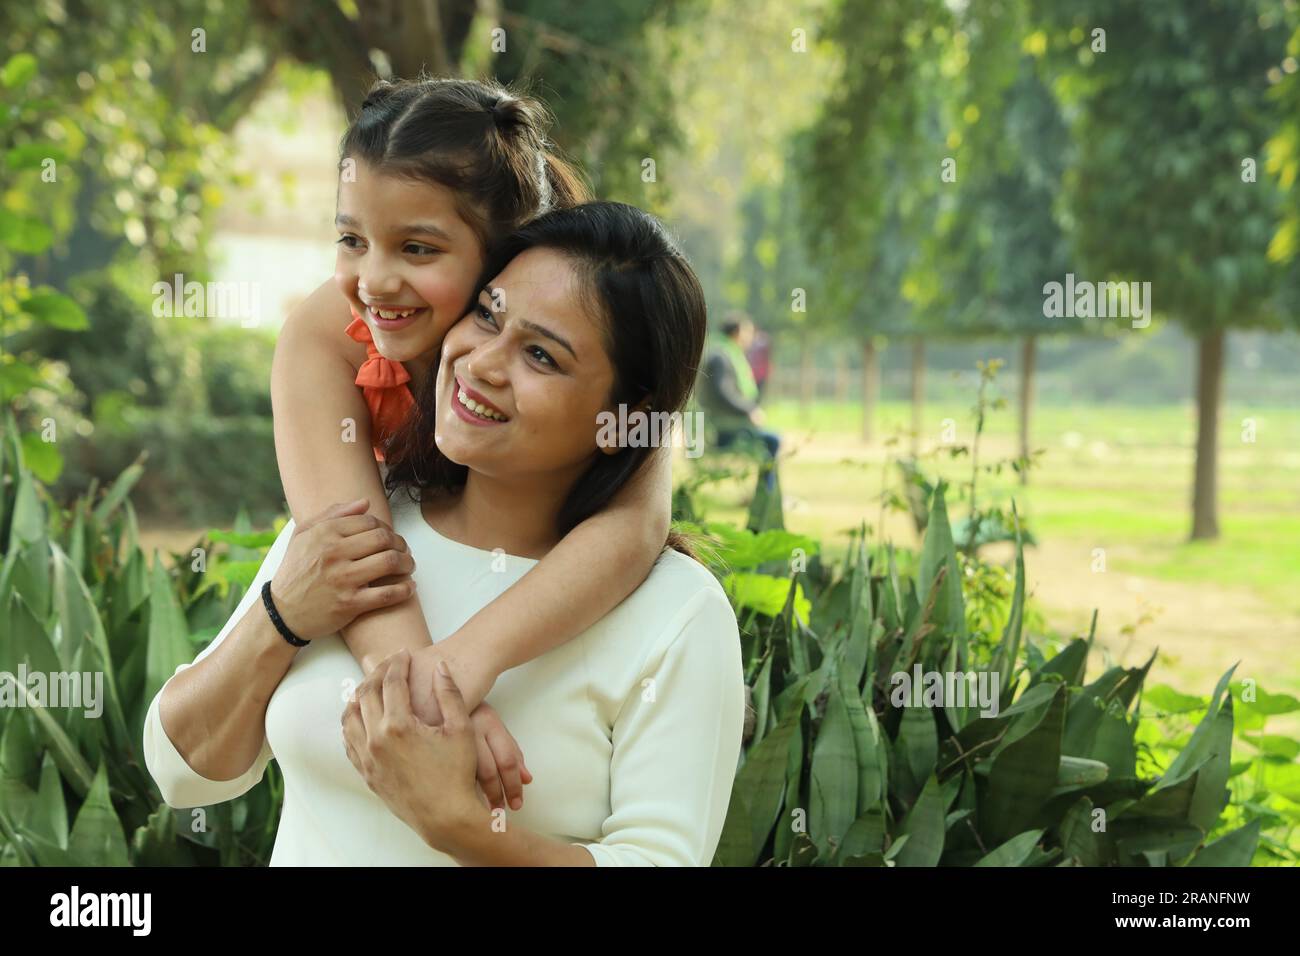 Mother and daughter enjoying in park surrounded with greenery and serenity. They are having joyful and cheerful time together in green environment. Stock Photo